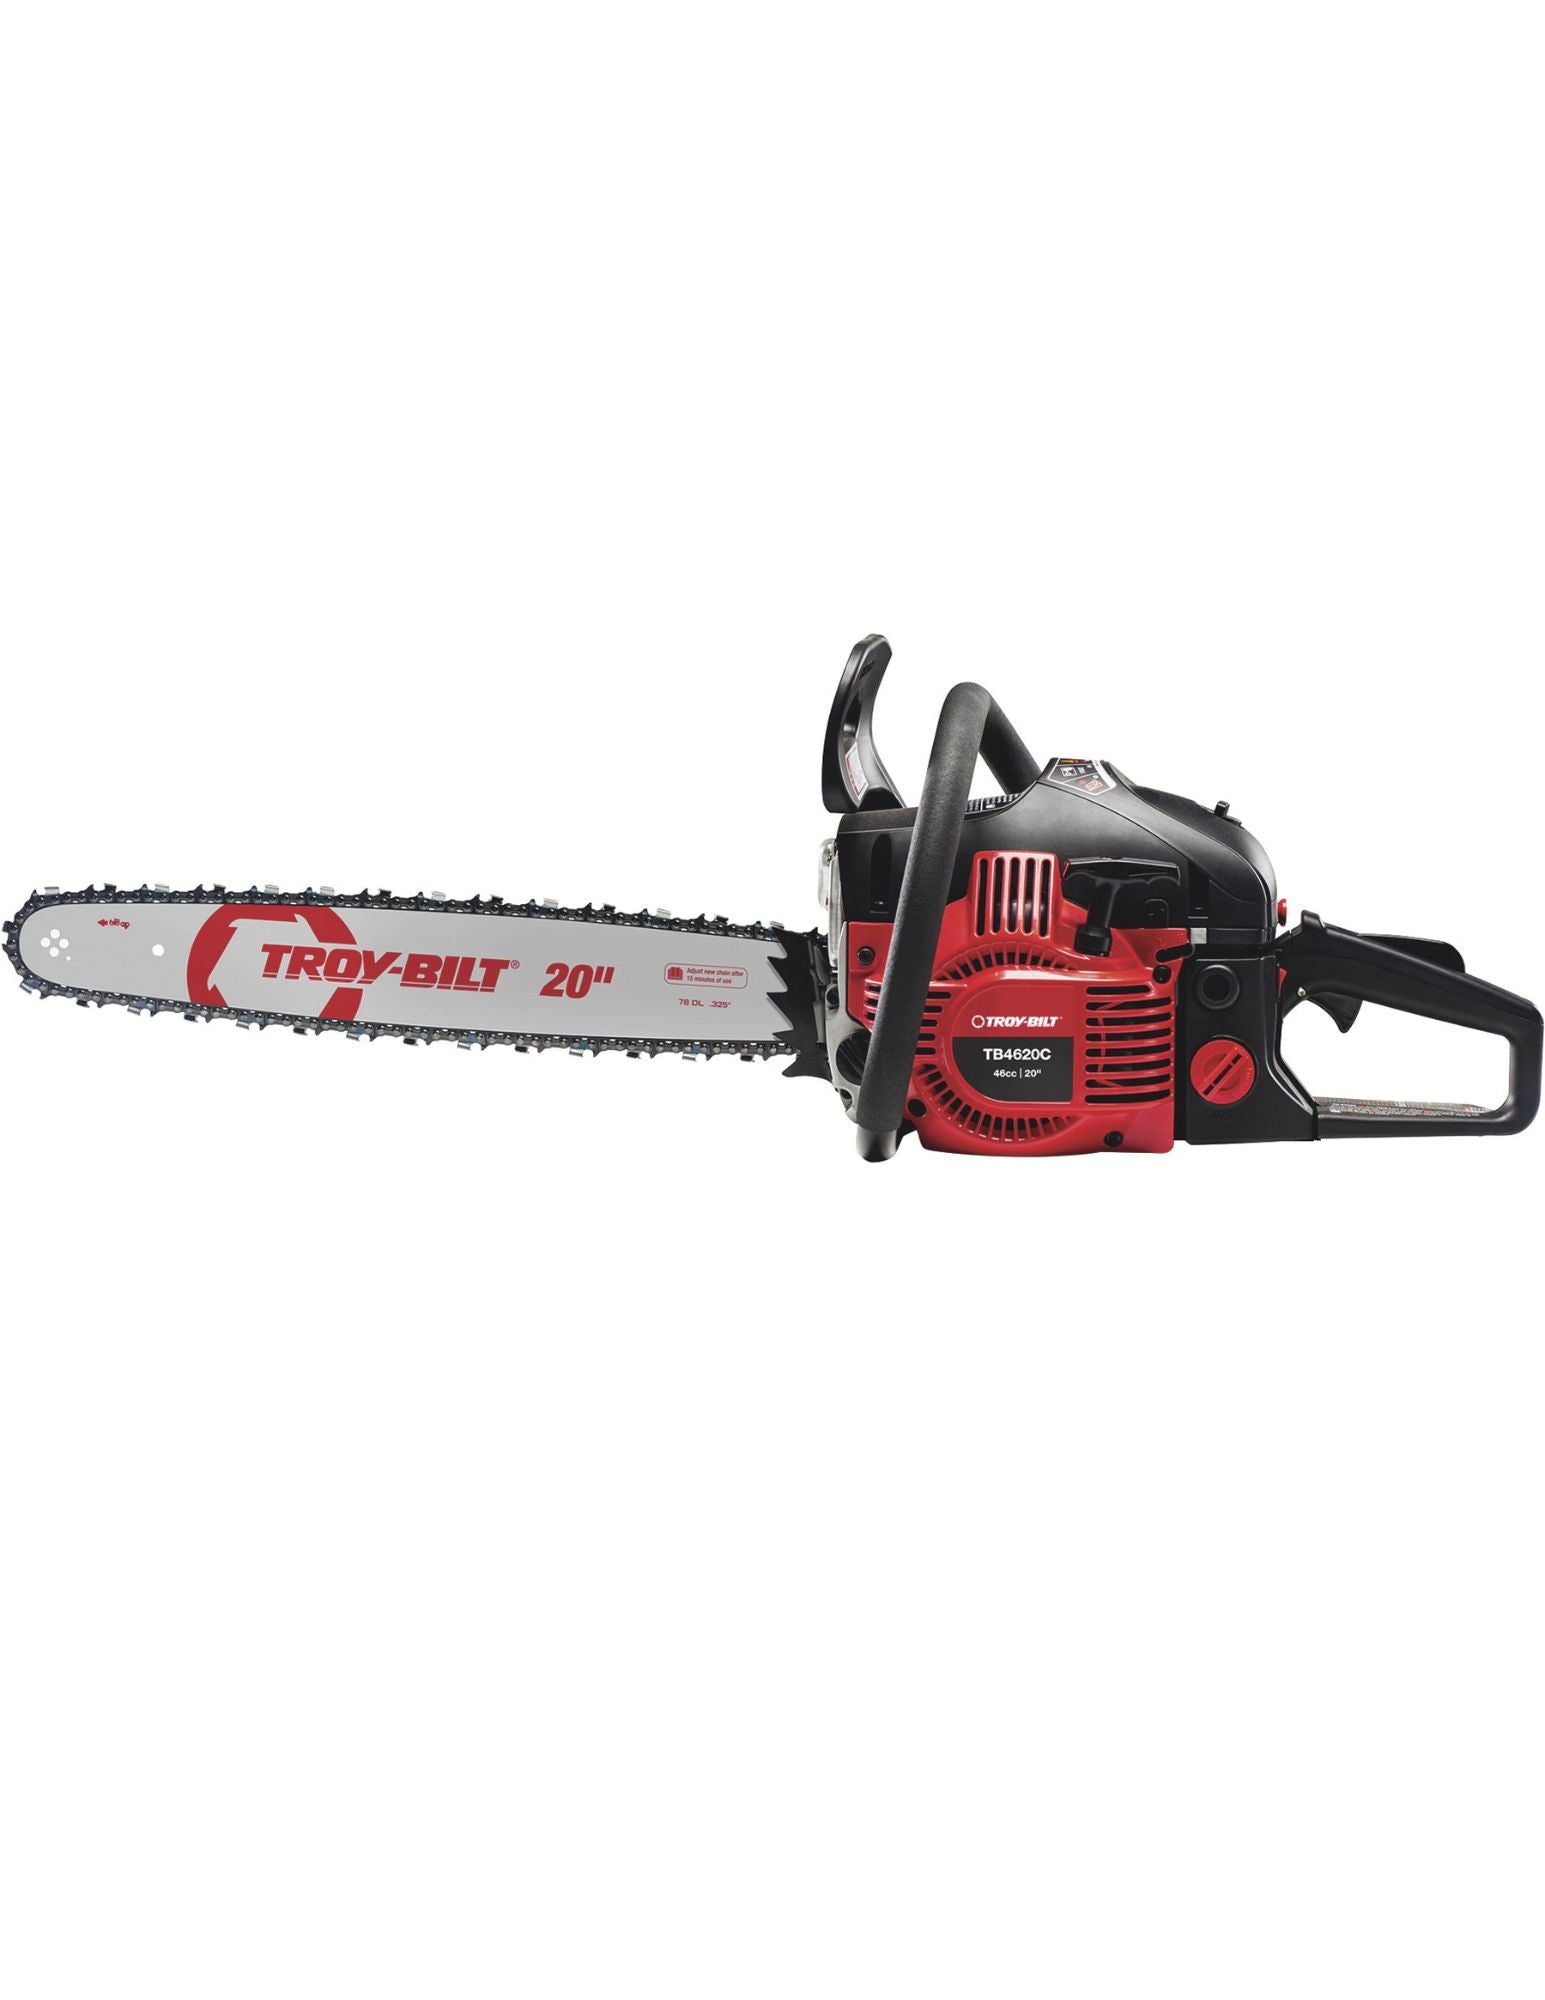 Troy Built Chainsaws